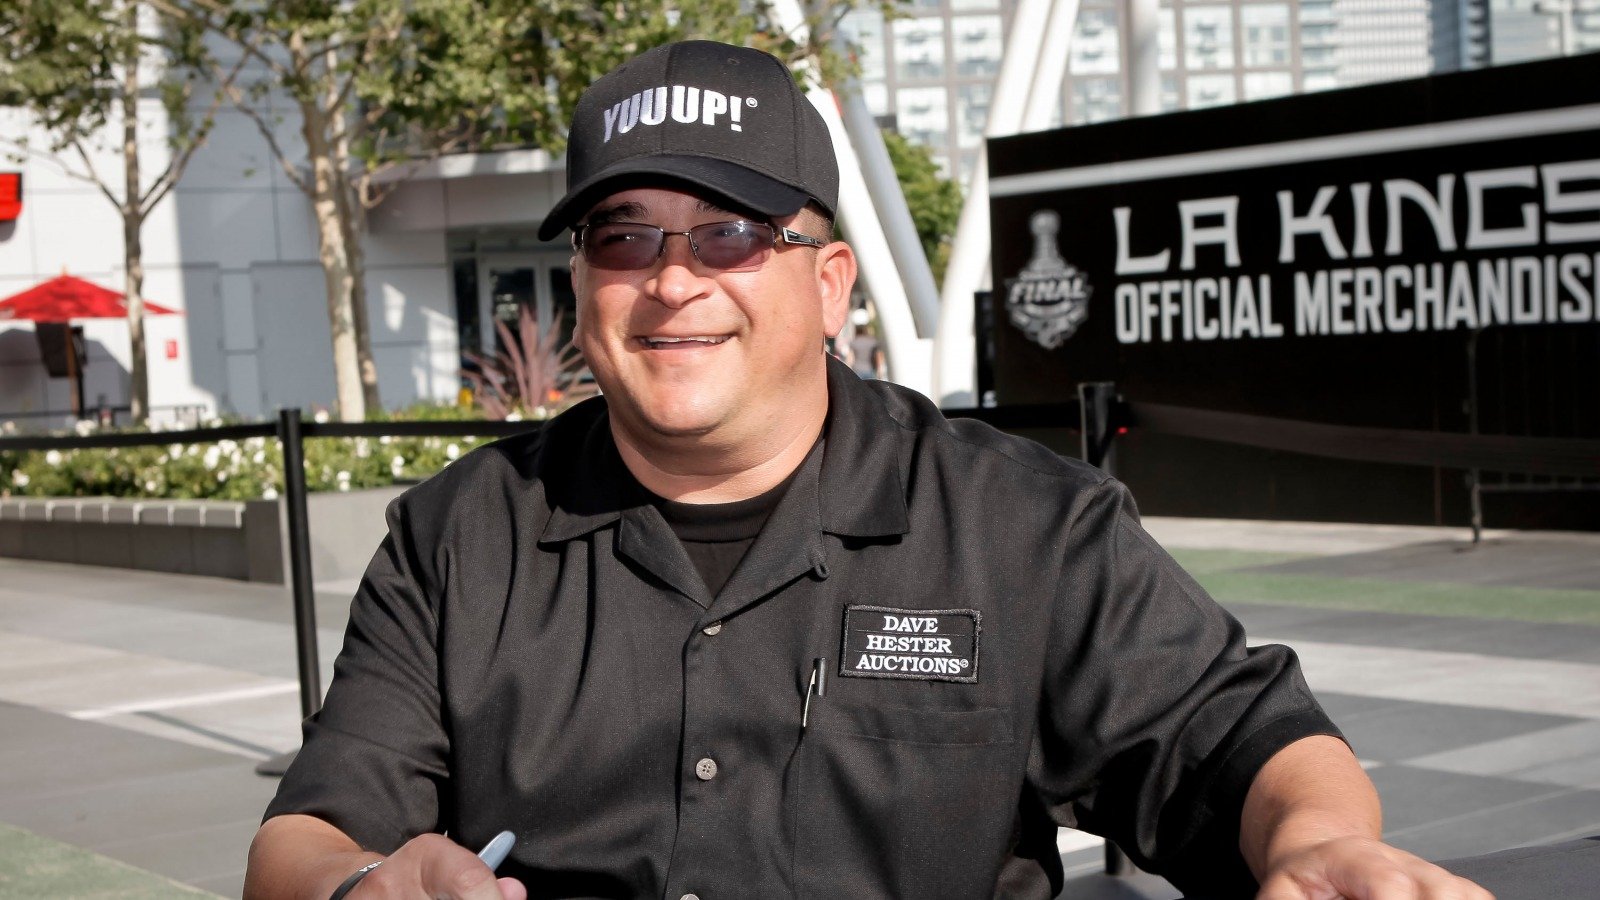 This Is What Storage Wars' Dave Hester Is Doing Now